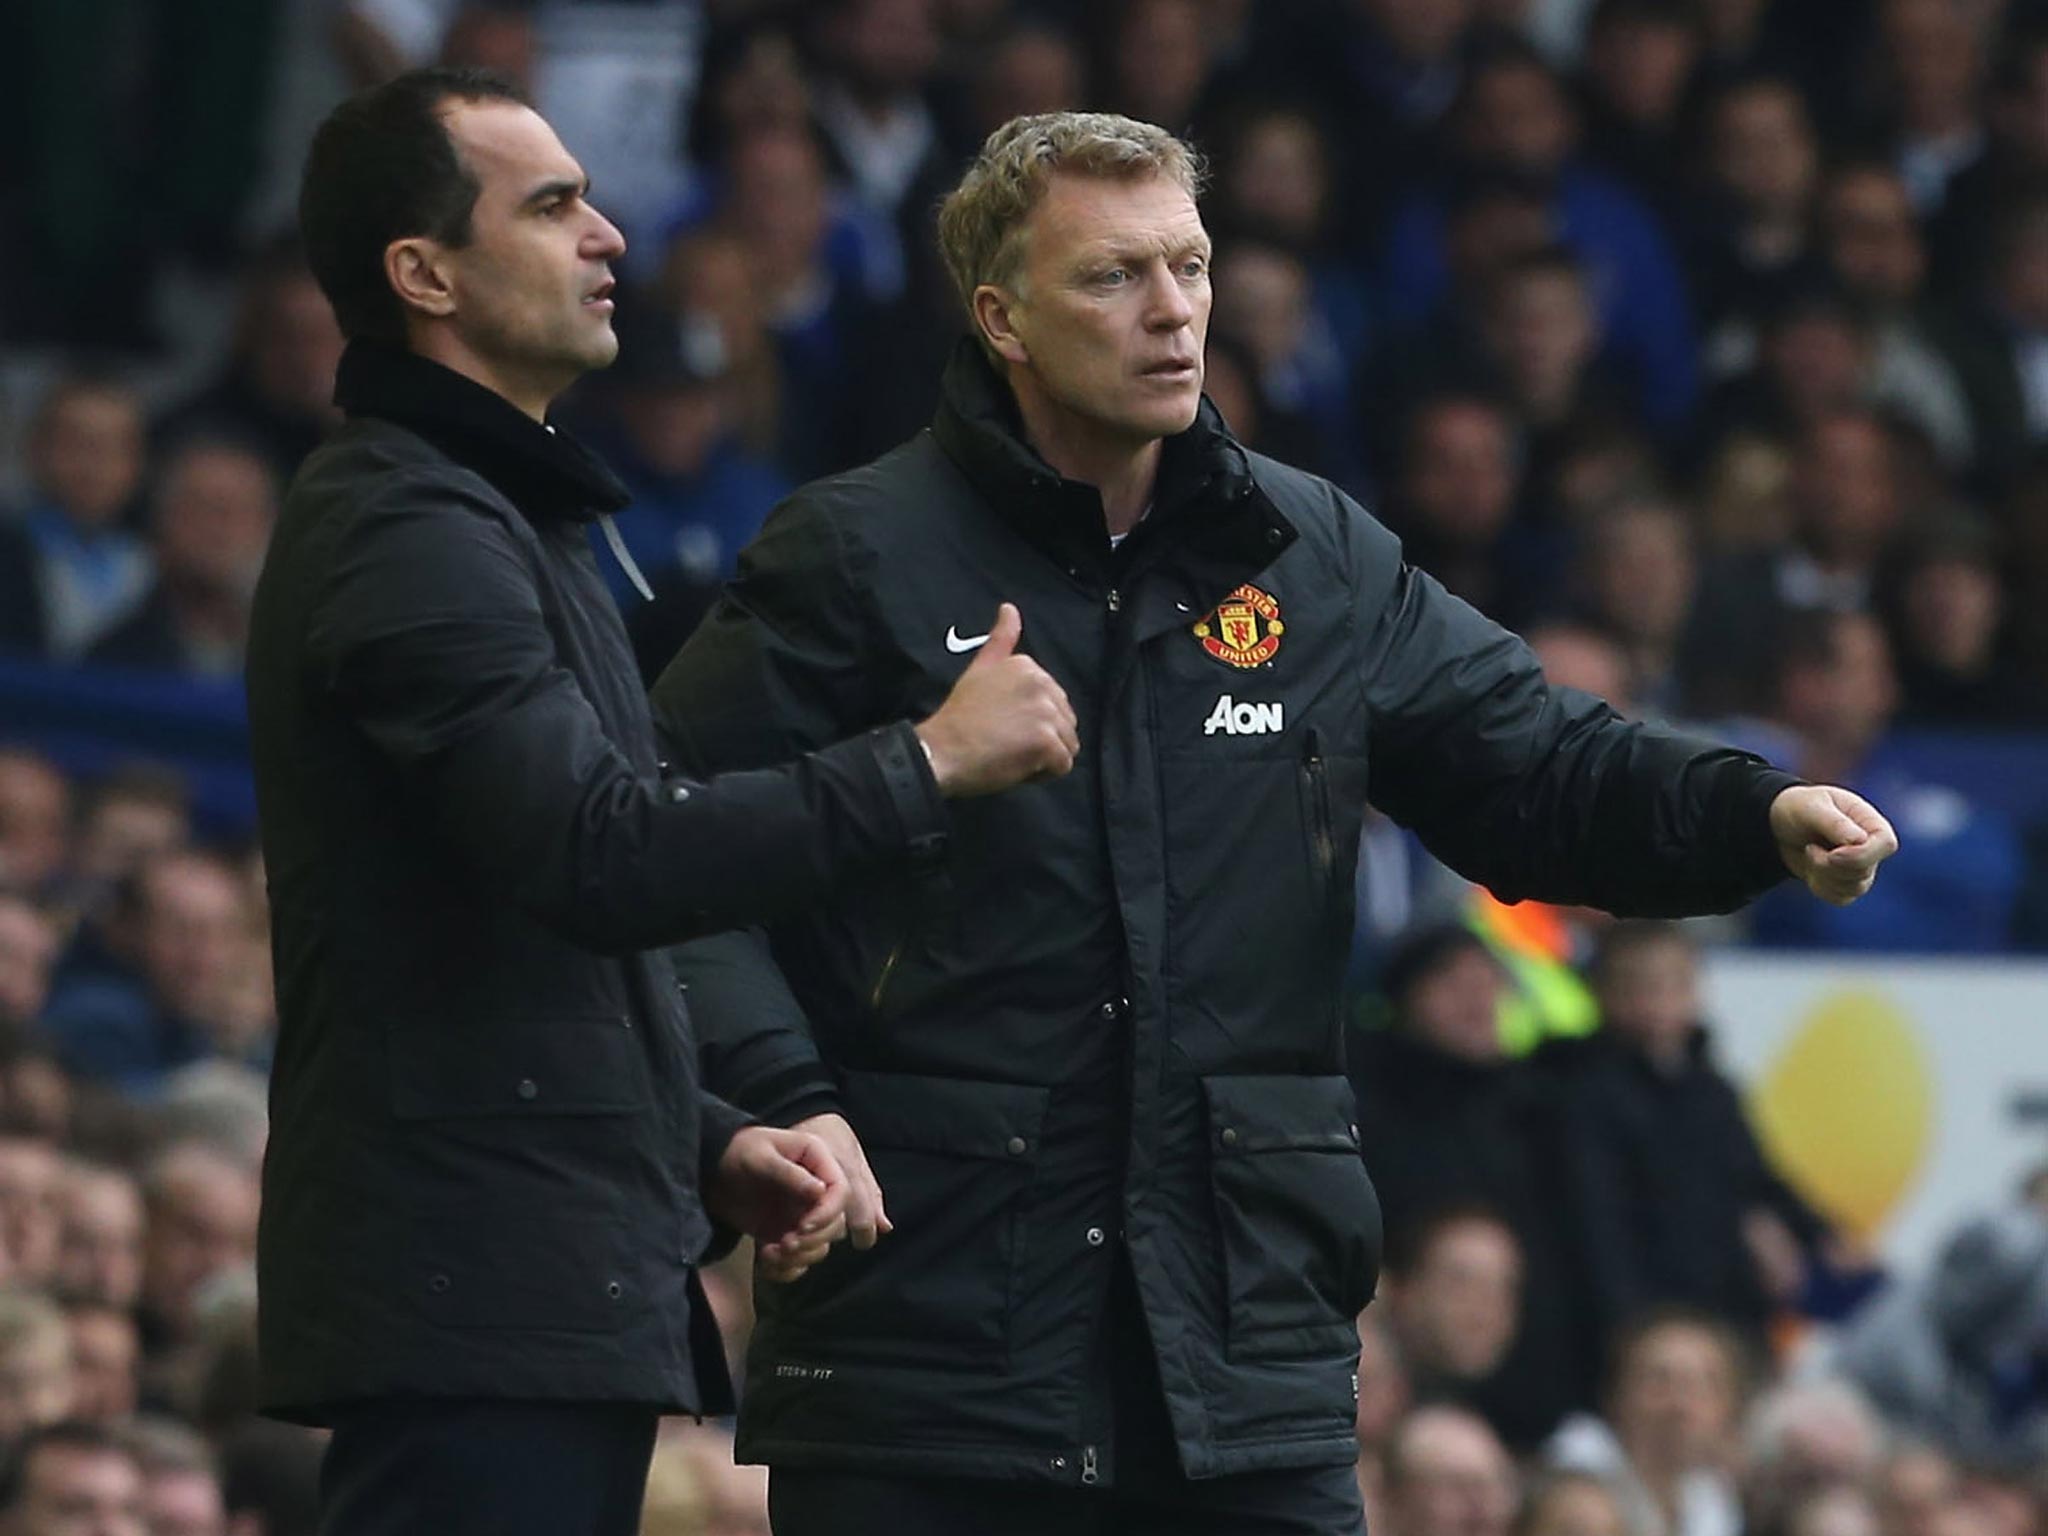 Roberto Martinez and David Moyes on the sidelines during Everton's 2-0 win over Manchester United